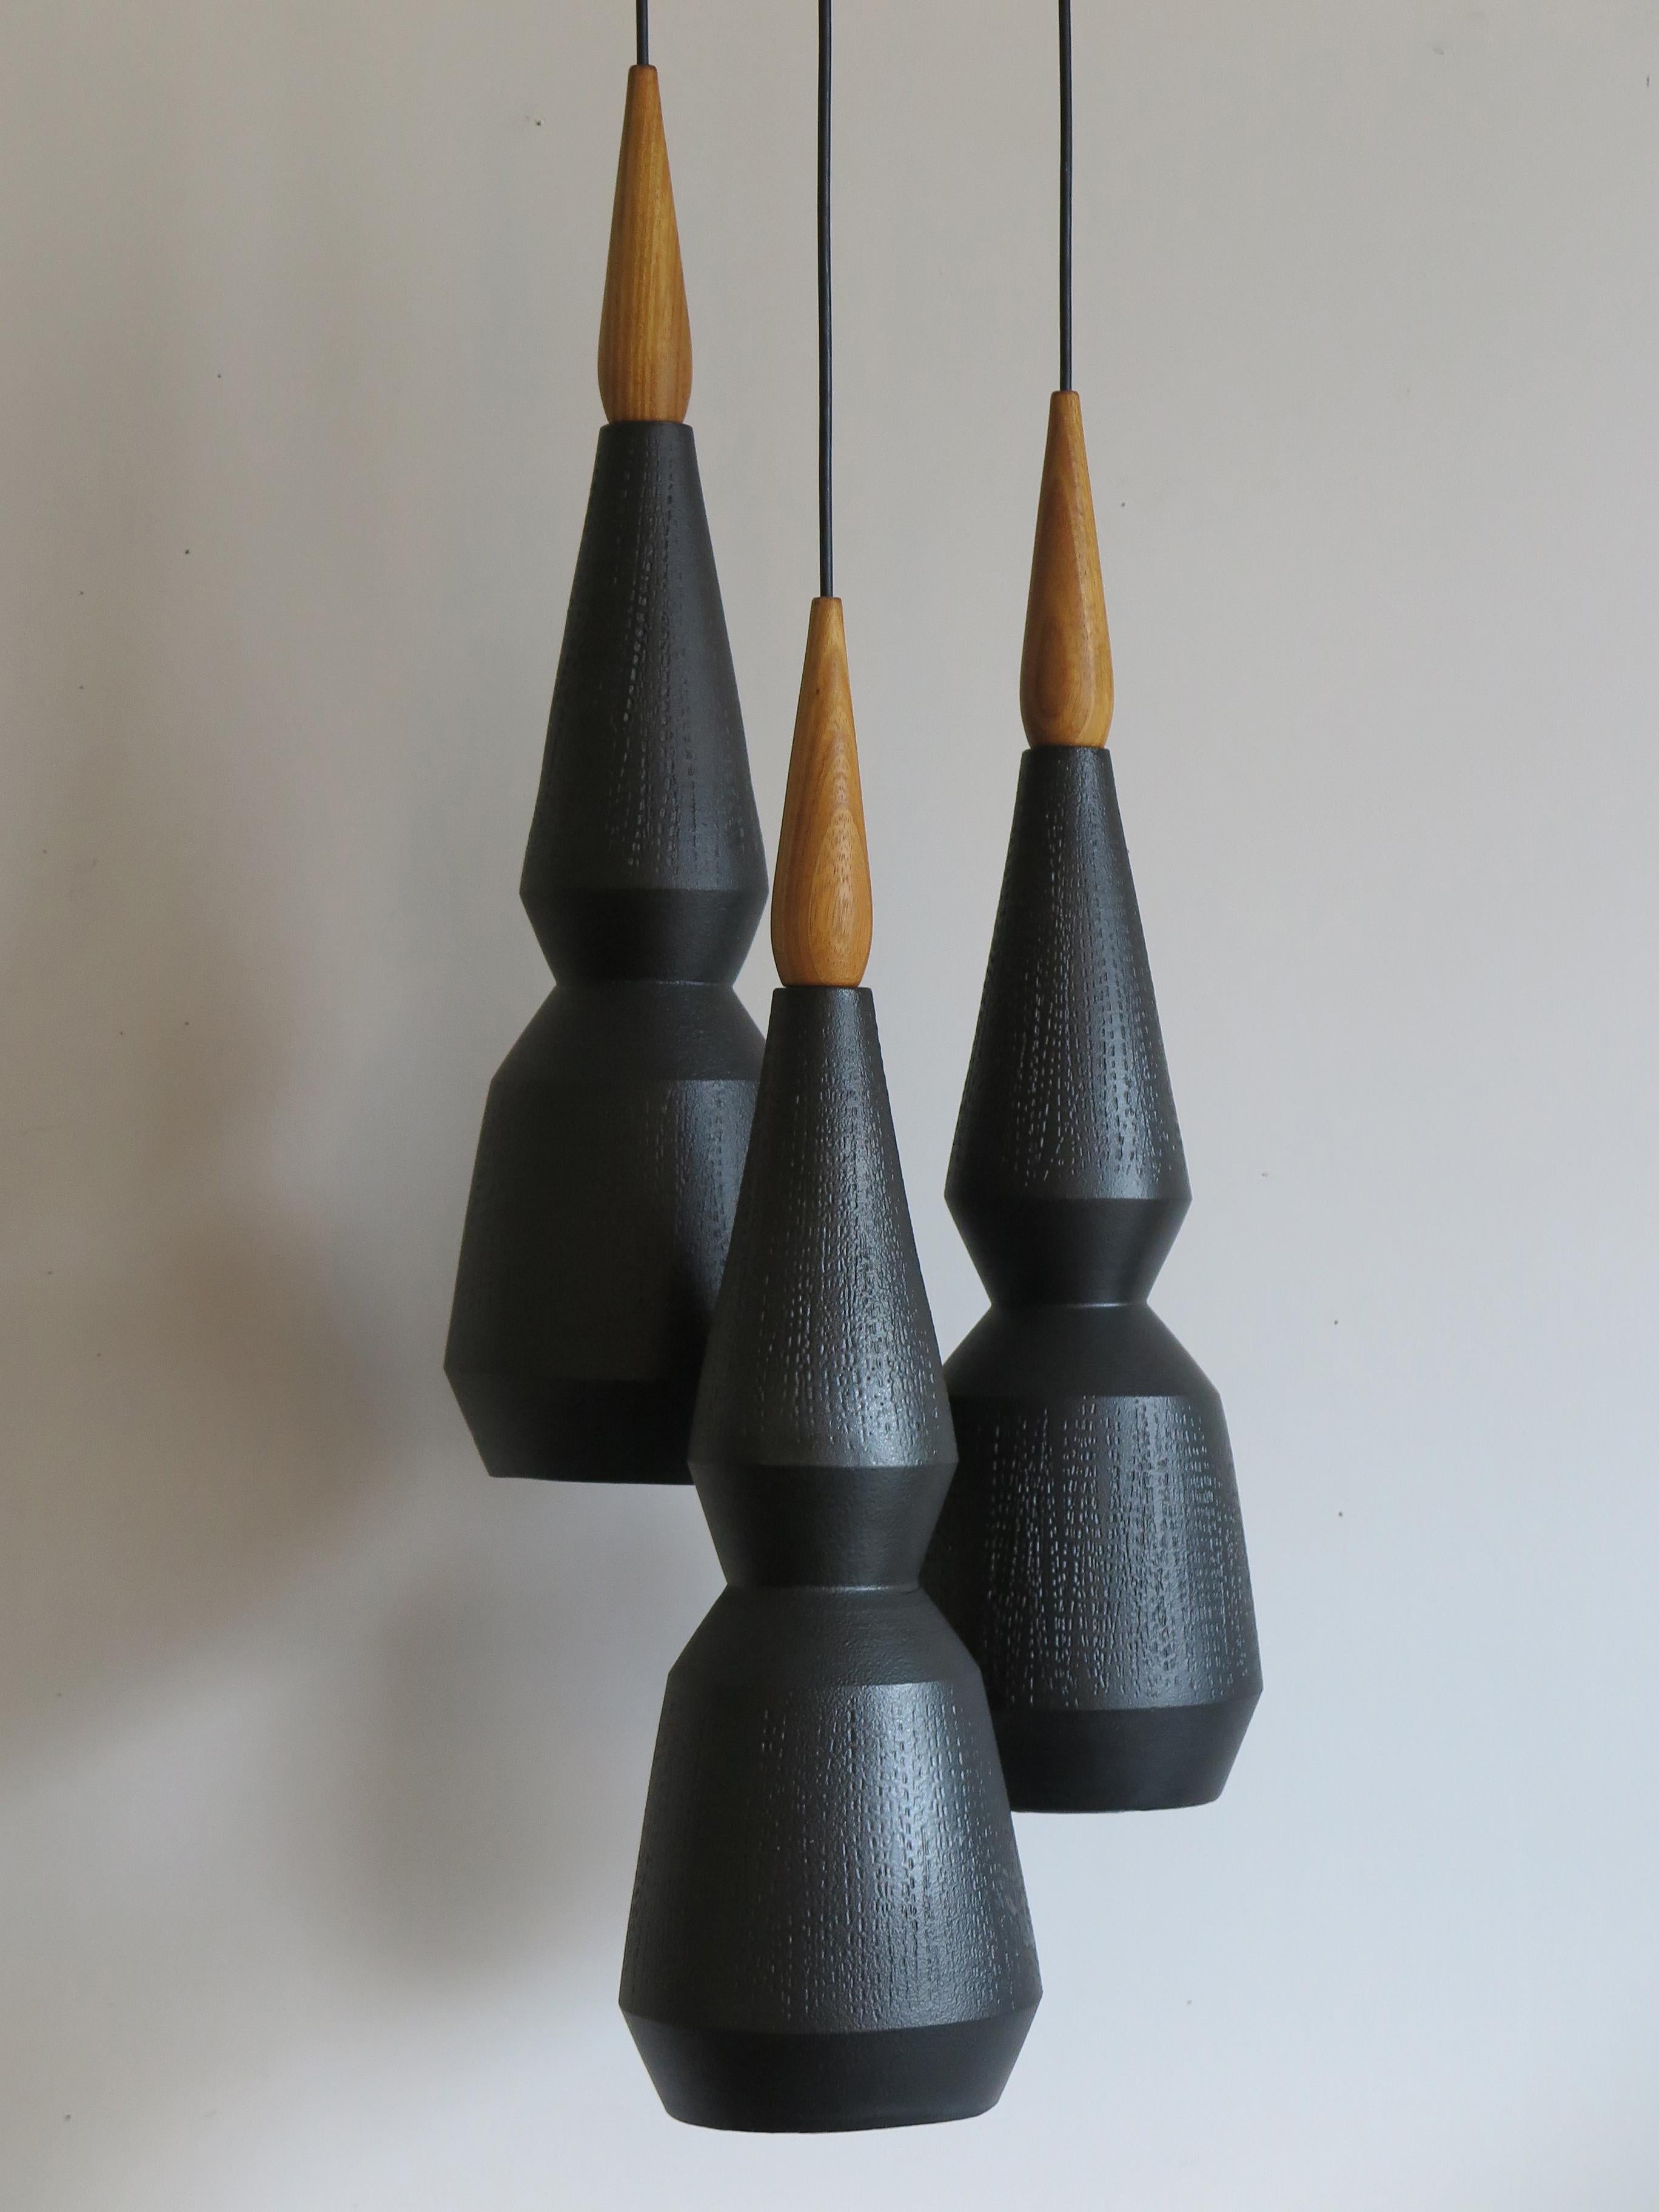 Set ceramic pendant lamps turned and hand-engraved with matte black enamel with wood details, contemporary design.
Single lamp measures: Height 68 cm, diameter 18 cm.